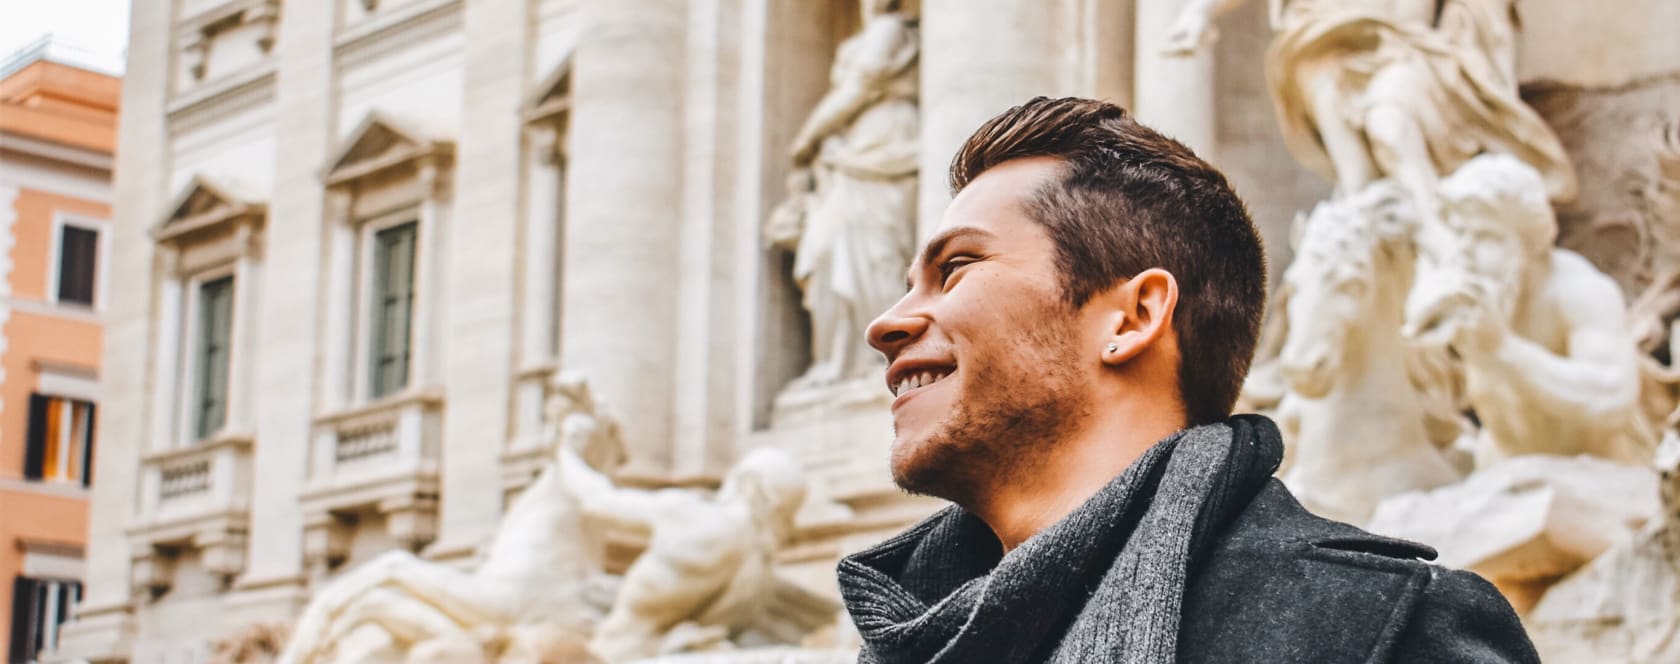 Student in Rome in front of Trevi fountain.